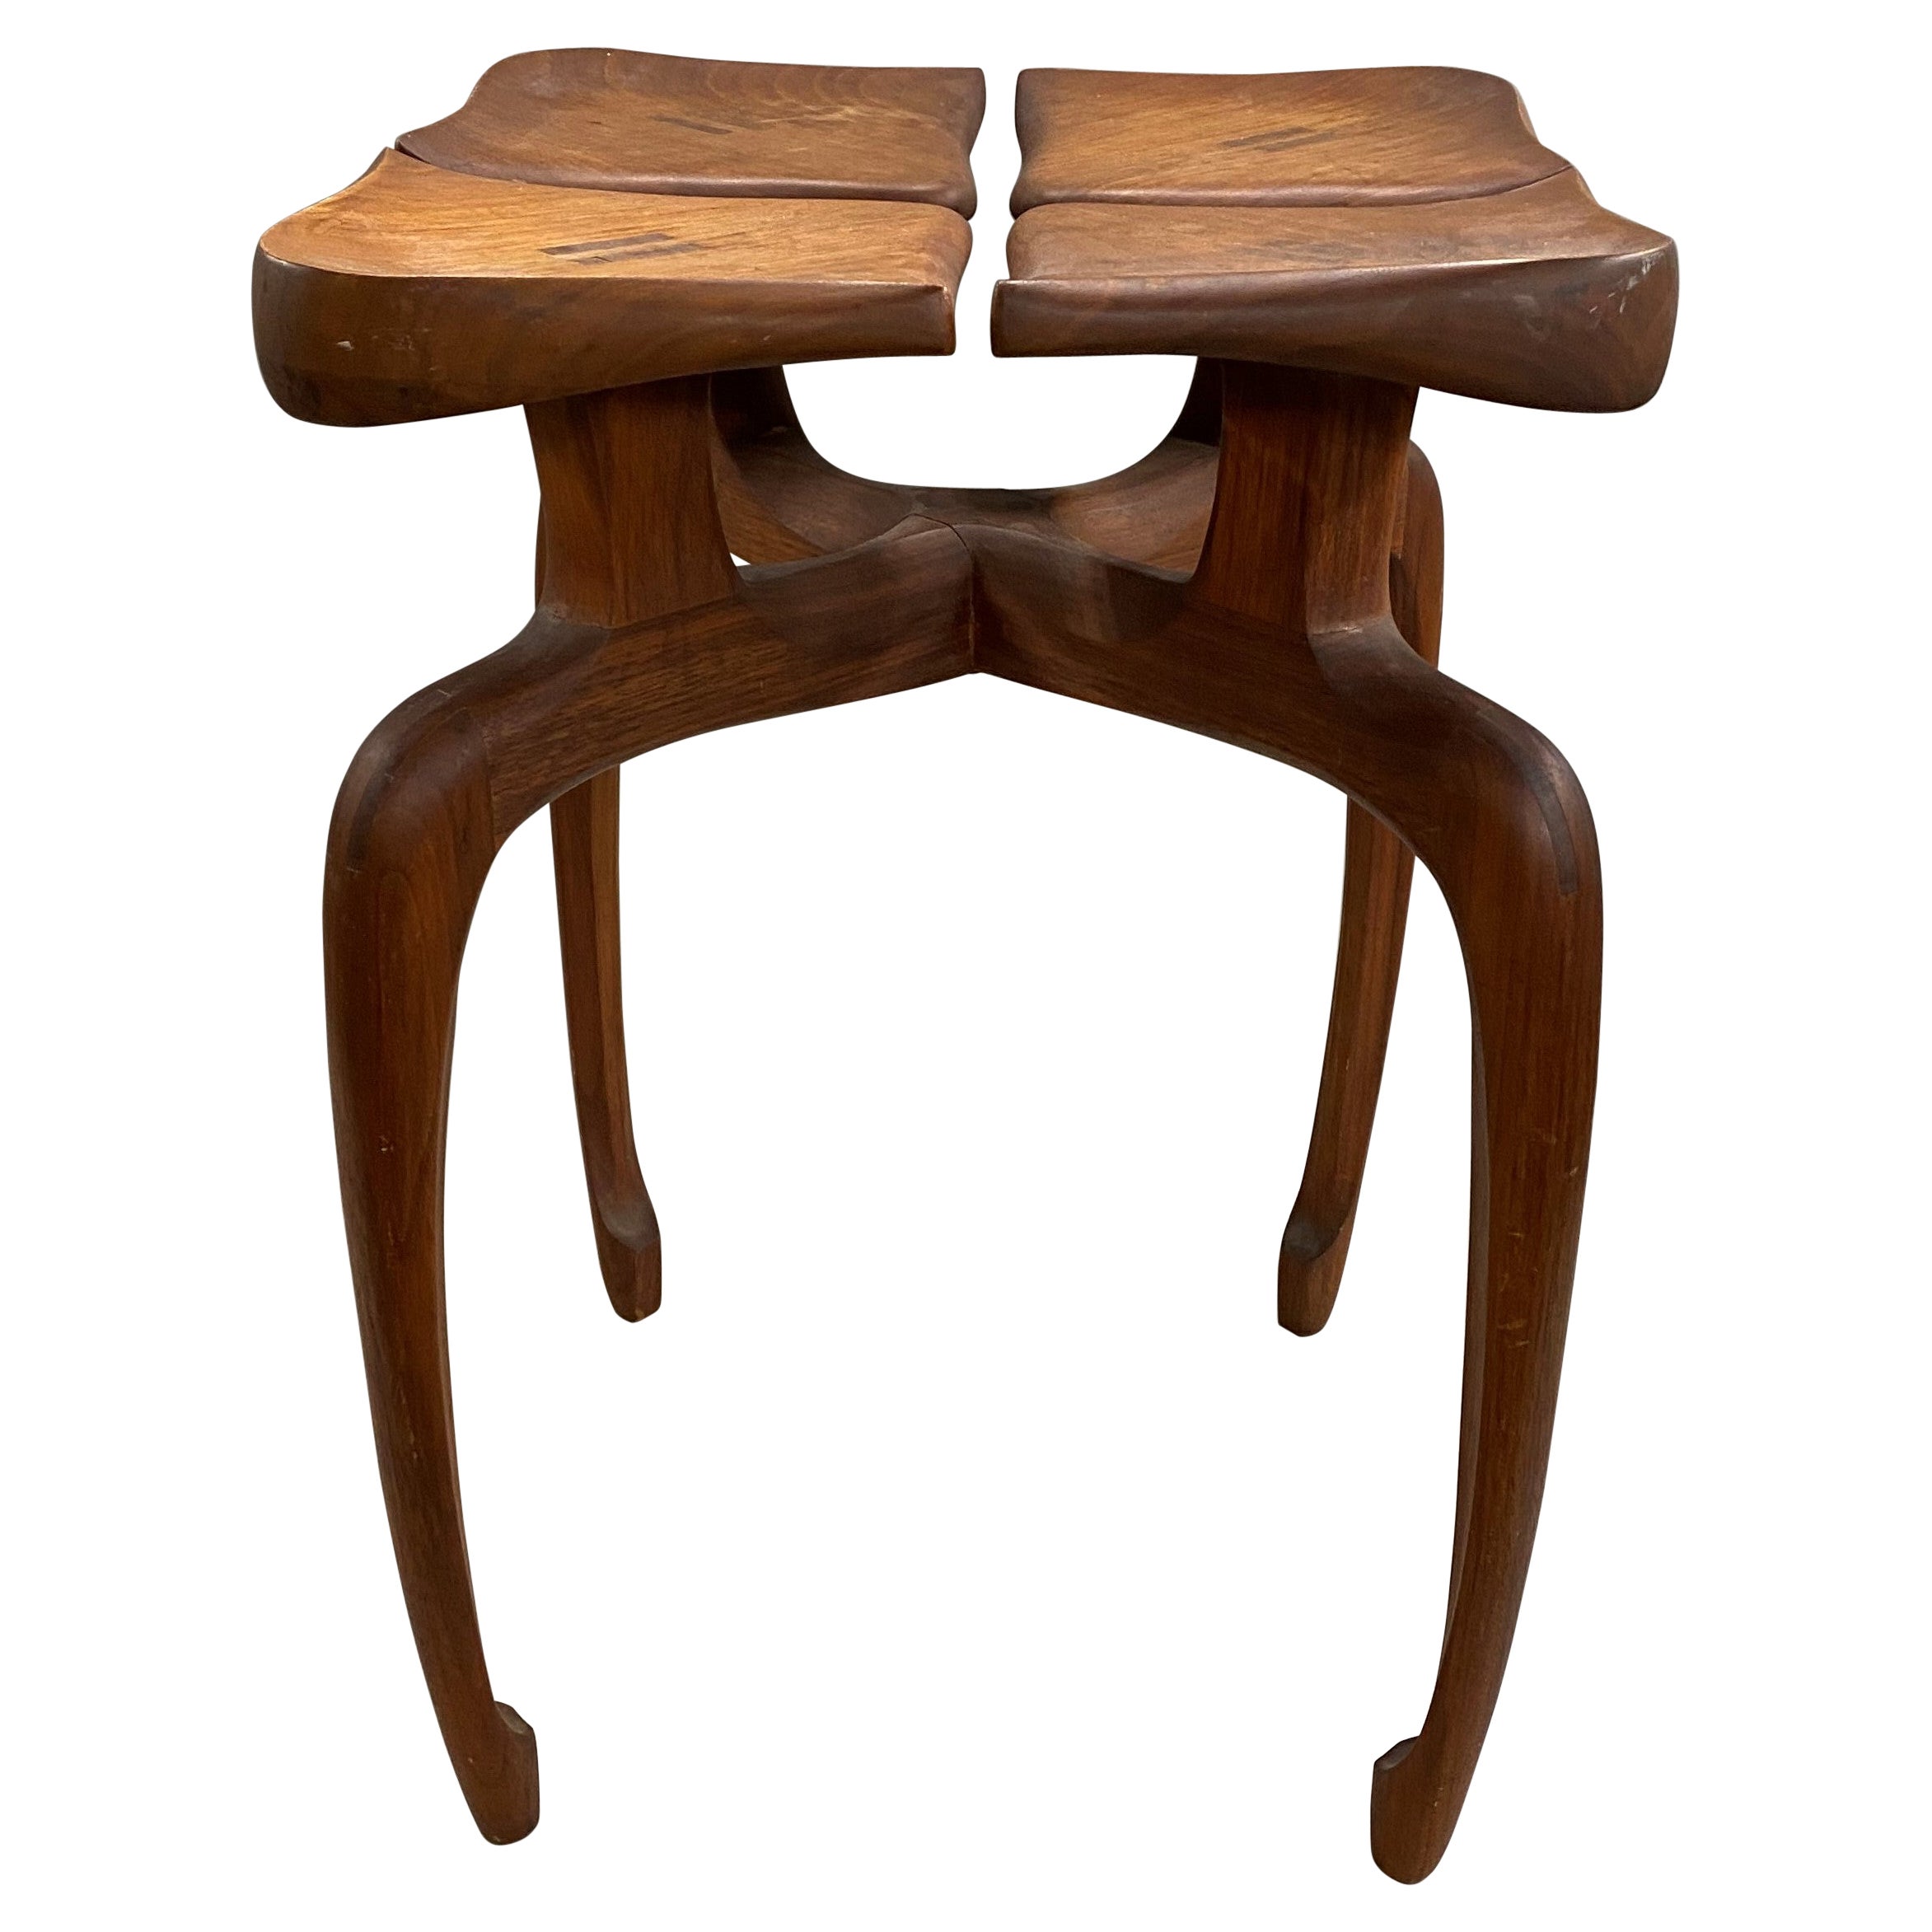 Hand Carved Modernist Low Table with Four Petals circa 1972